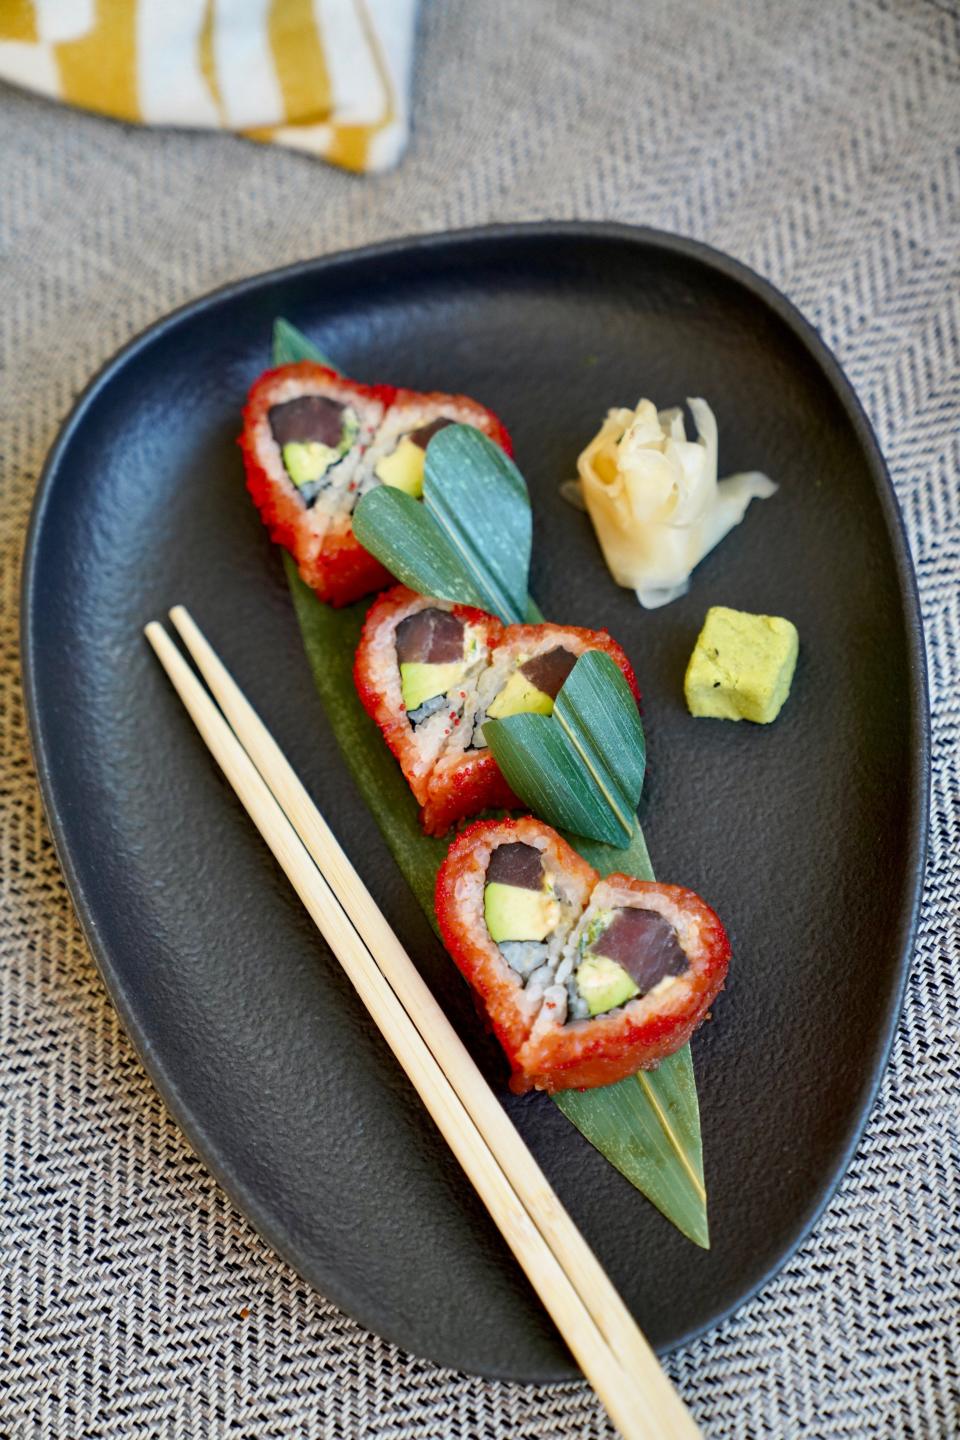 LT Bar & Grill in Hackensack is offering a special Valentine's Day menu that kicks off with spicy heart-shaped tuna roll.